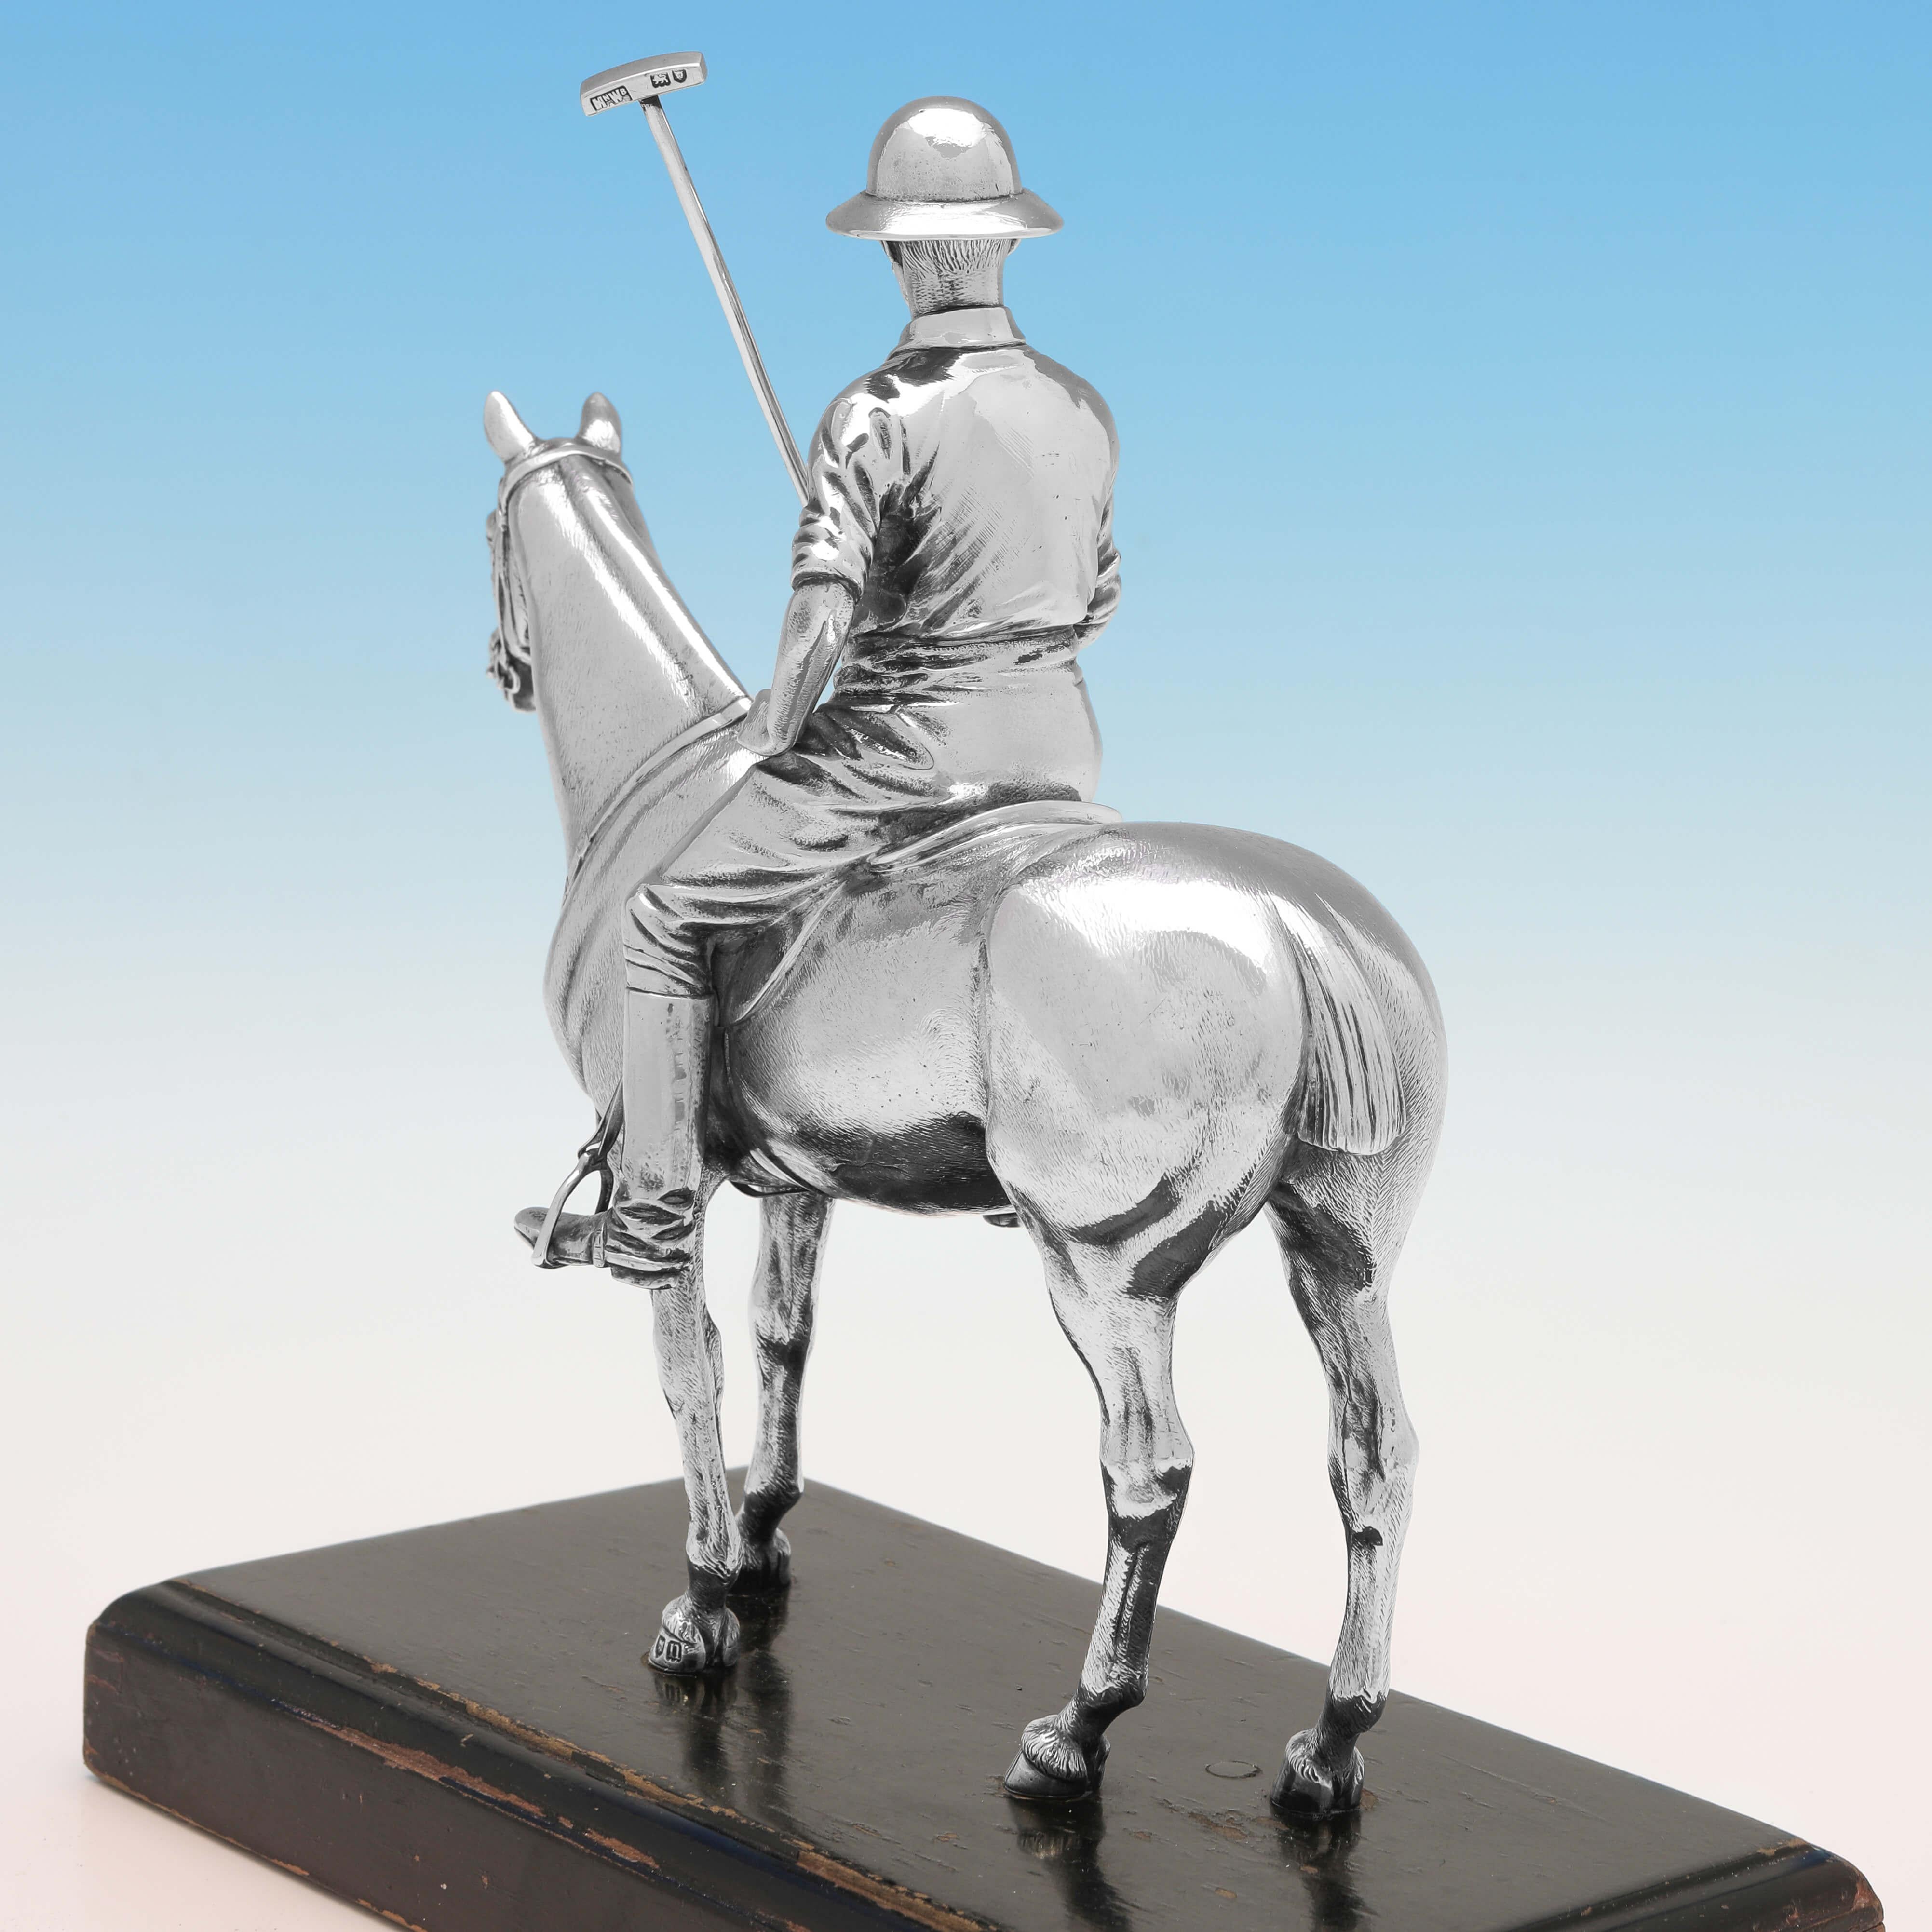 English Antique Sterling Silver Polo Horse & Player Sculpture, British Olympics, 1908 For Sale